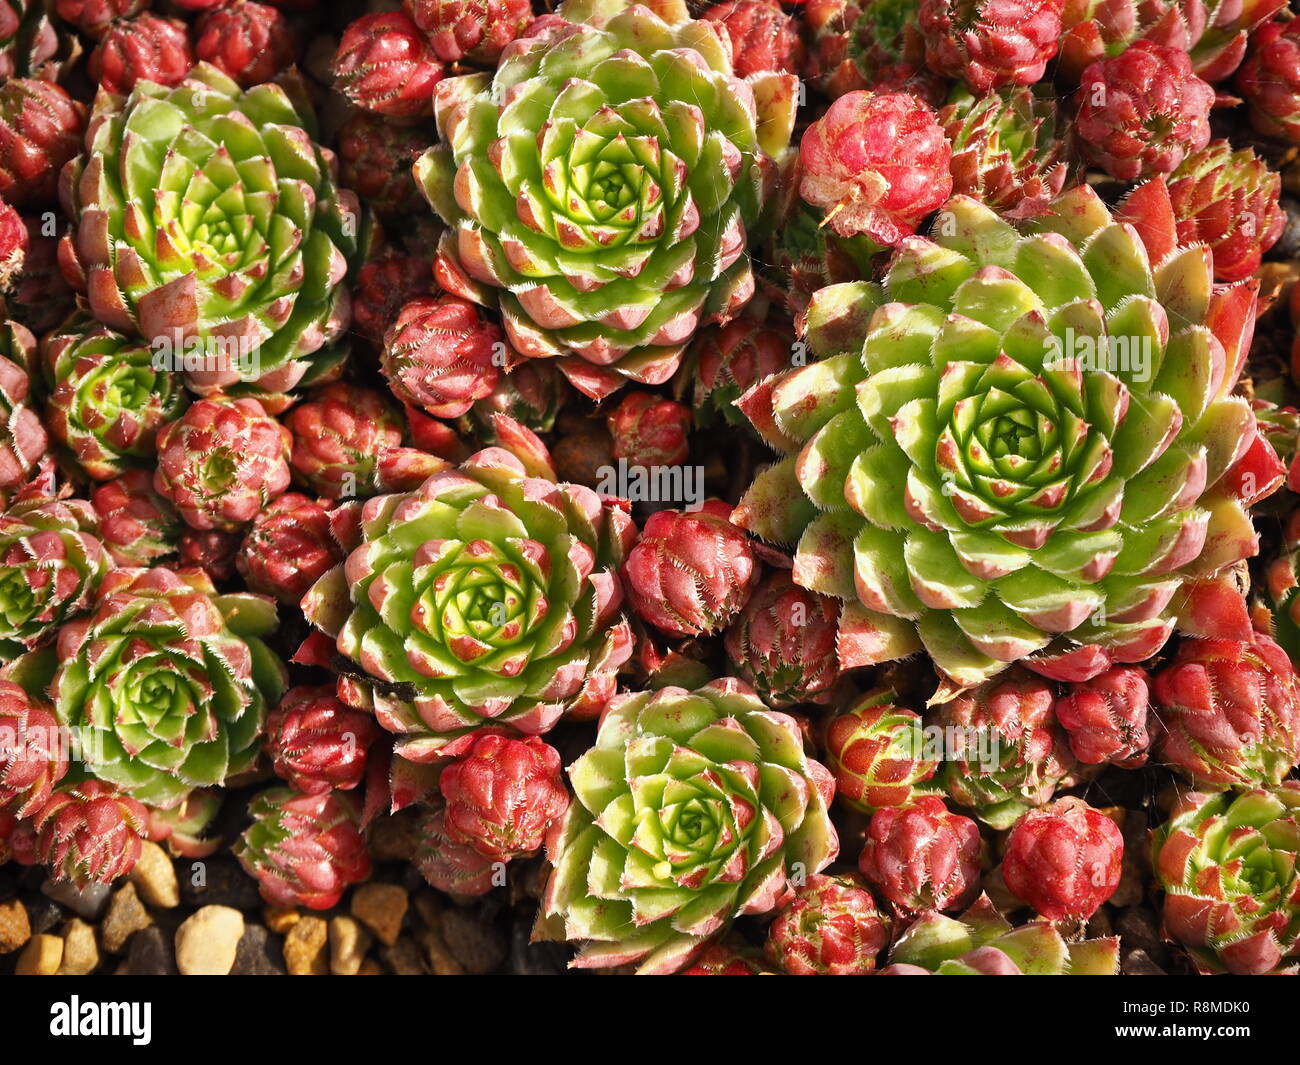 Jovibarba hirta succulent plant with pink and green leaves viewed from above Stock Photo